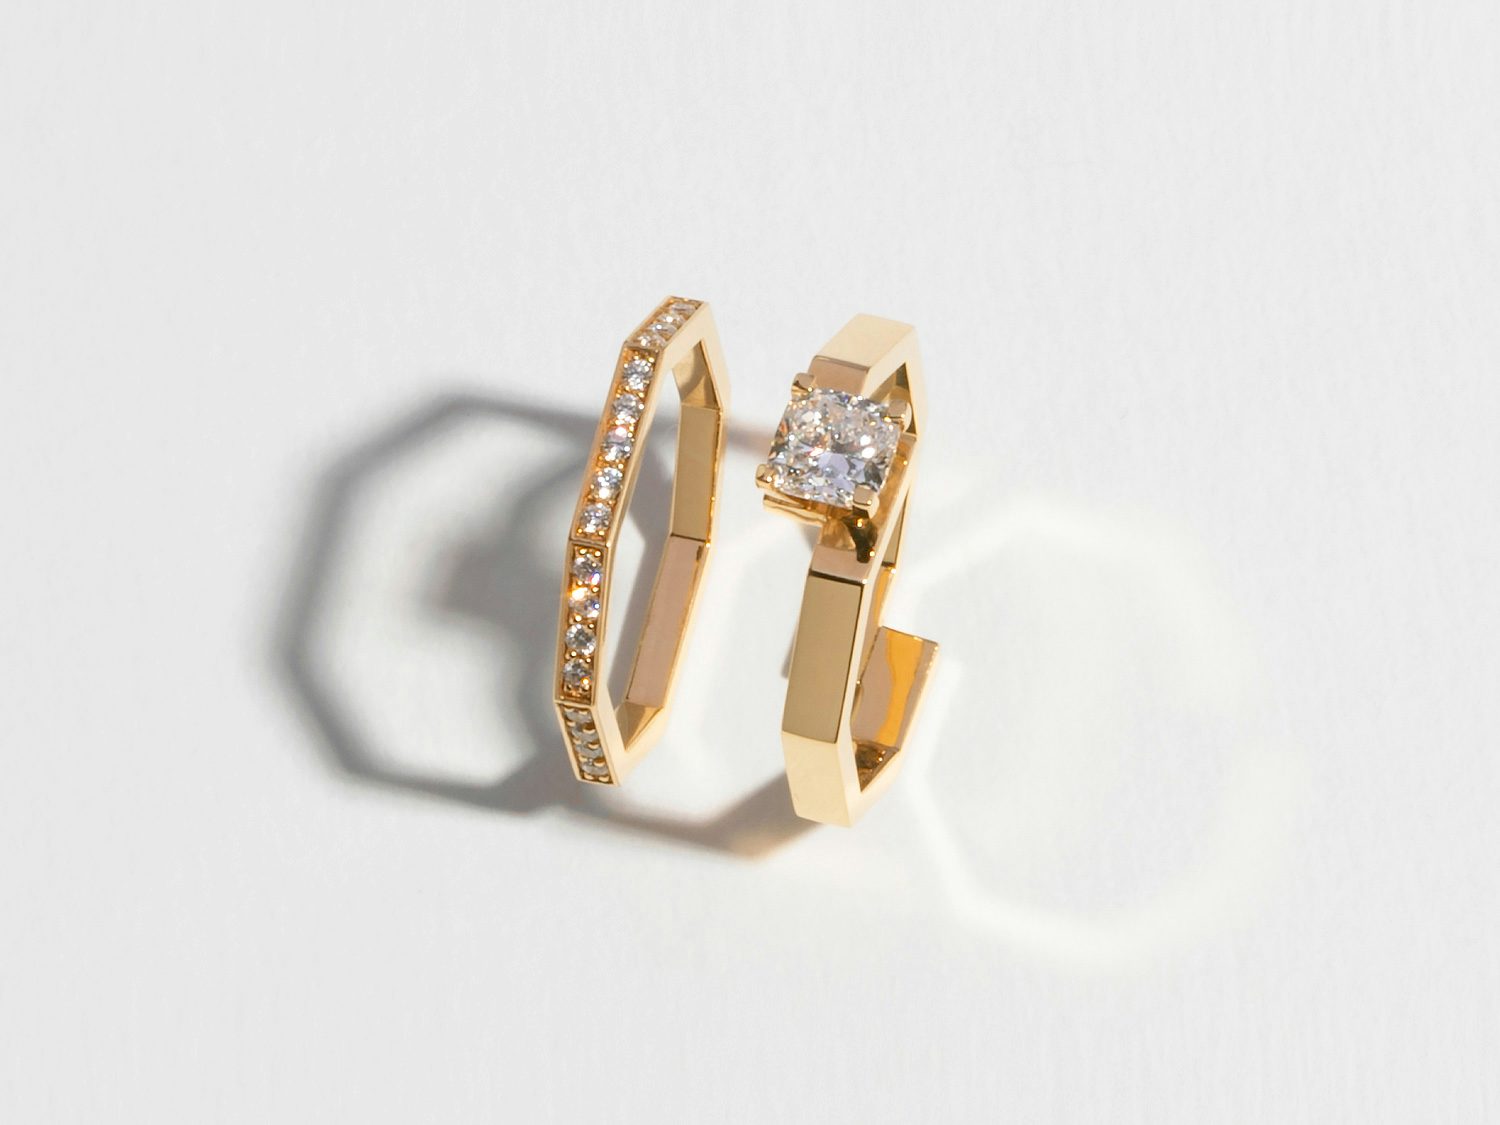 Solitaire Octogone in 18k Fairmined ethical yellow gold set with a 0.7 carat cushion cut lab-grown diamond (GVS quality)